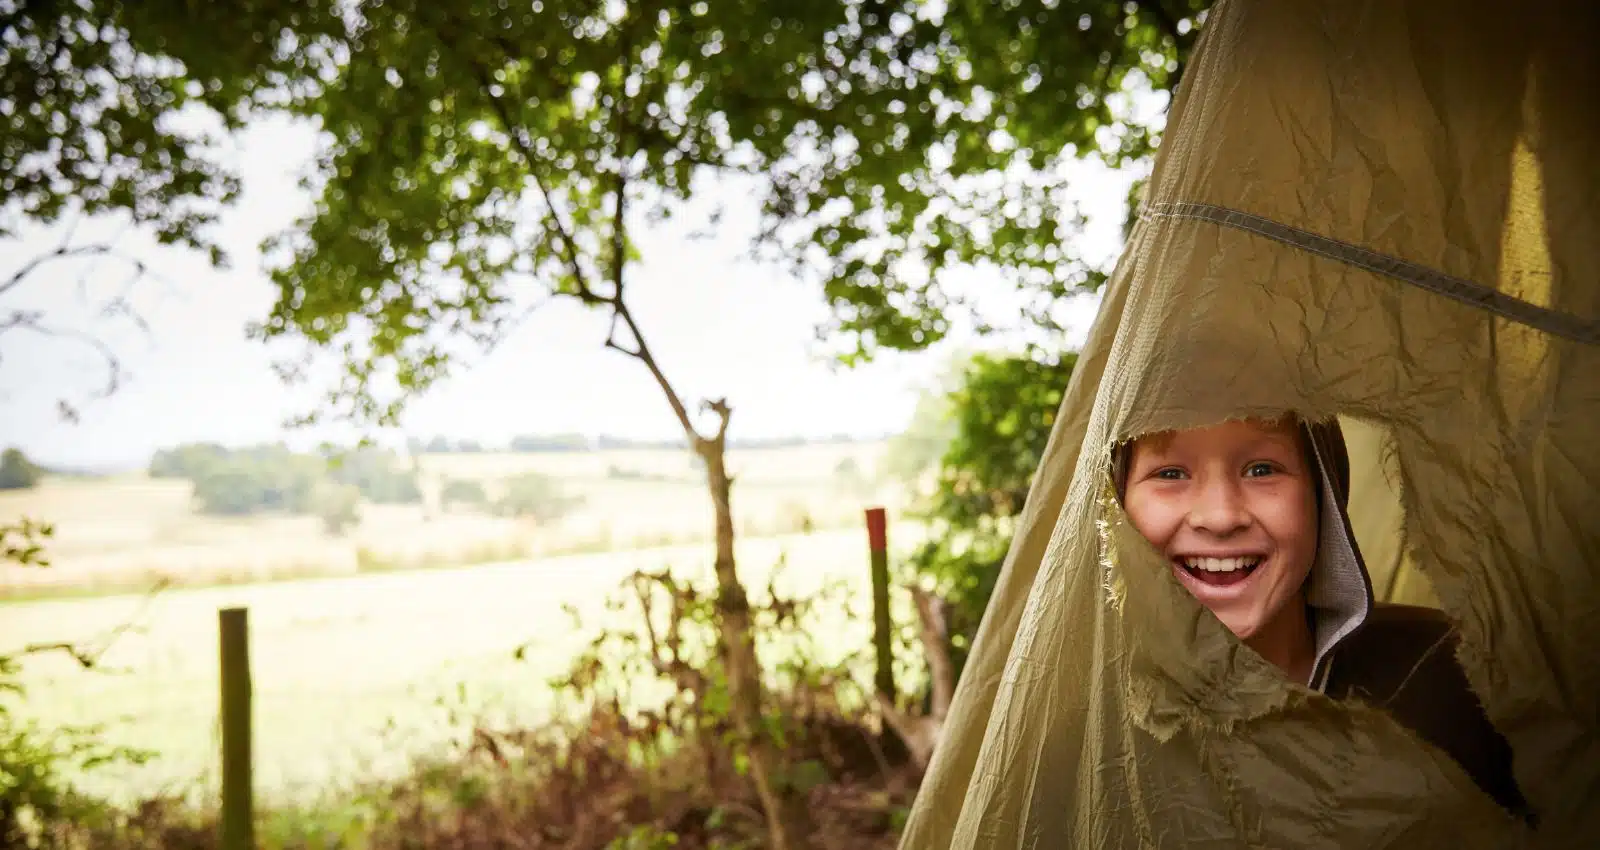 6 Fun Nature Activities to Do in Your Own Garden